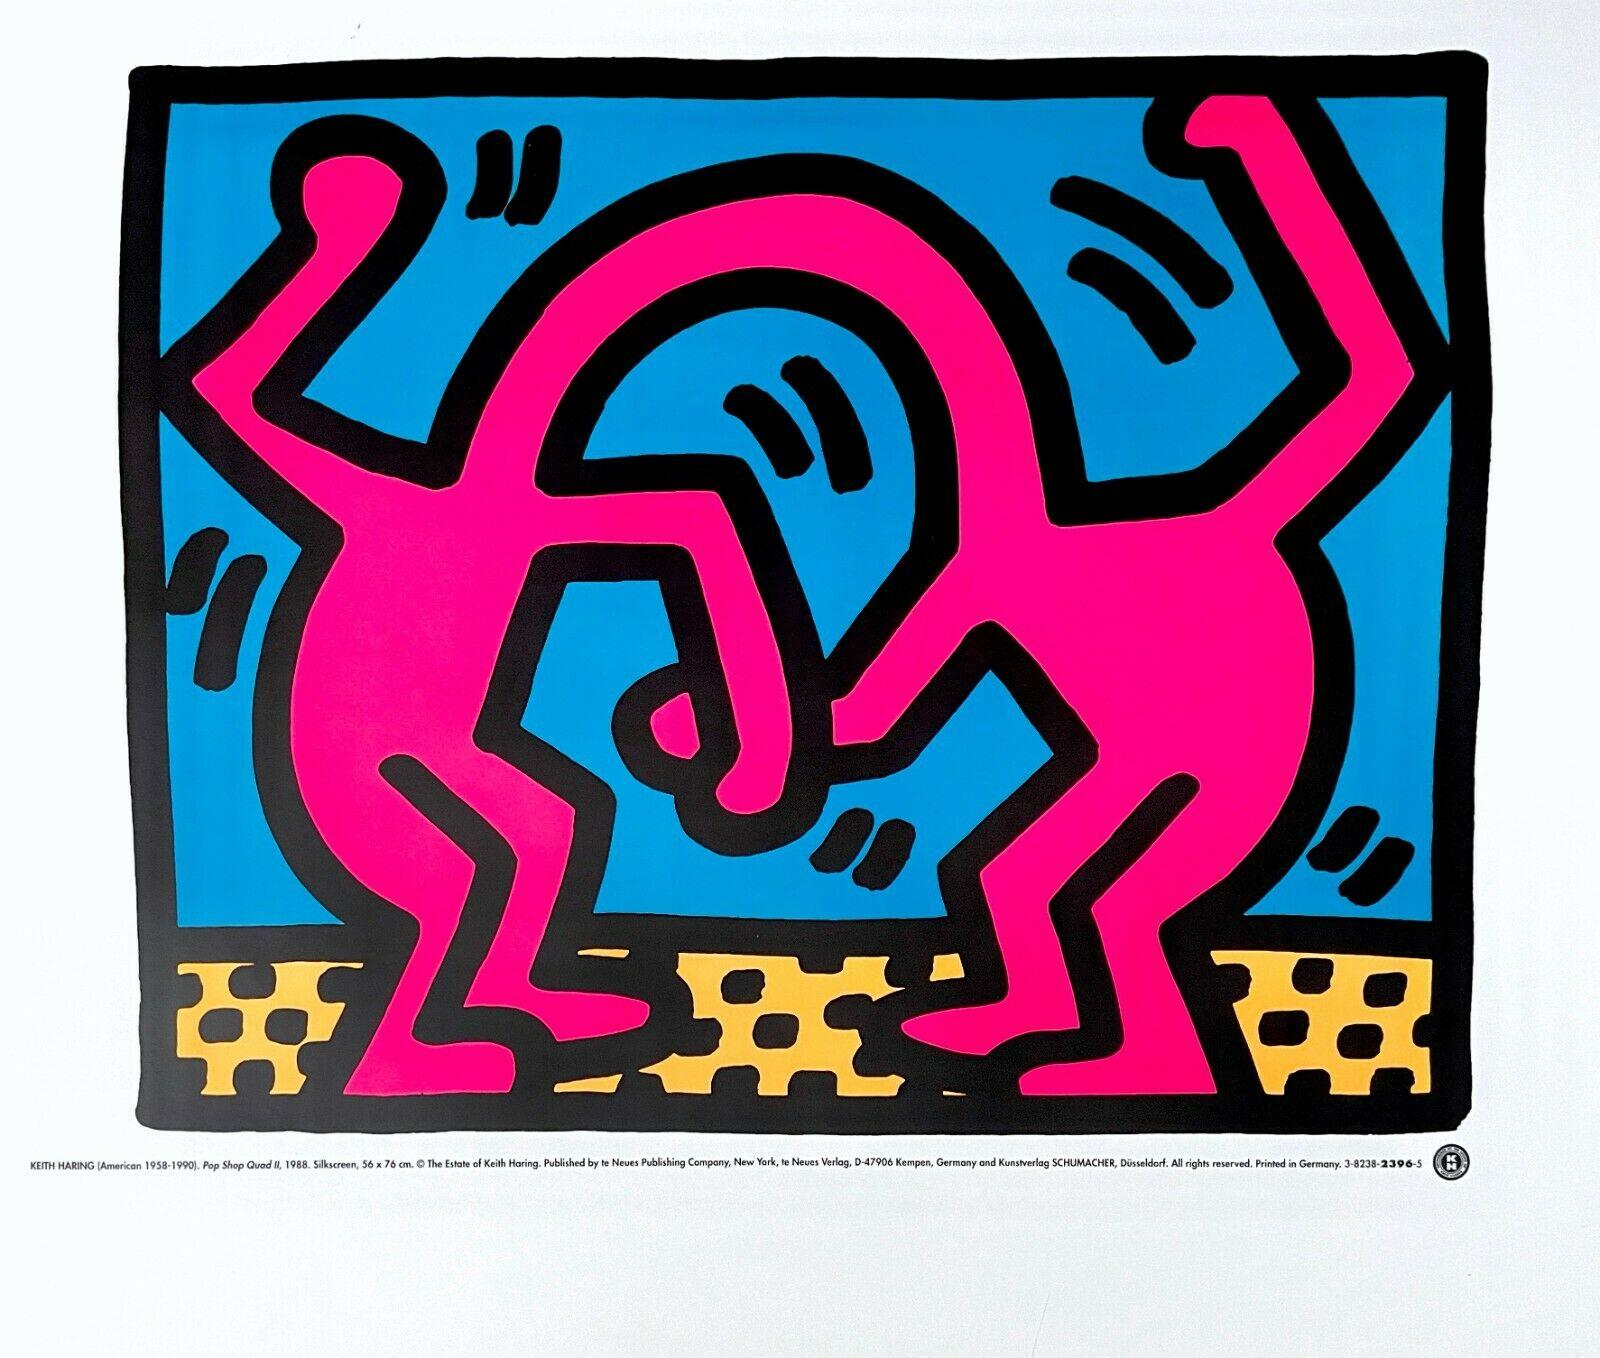 Haring, Pop Shop Quad II - Print by Keith Haring